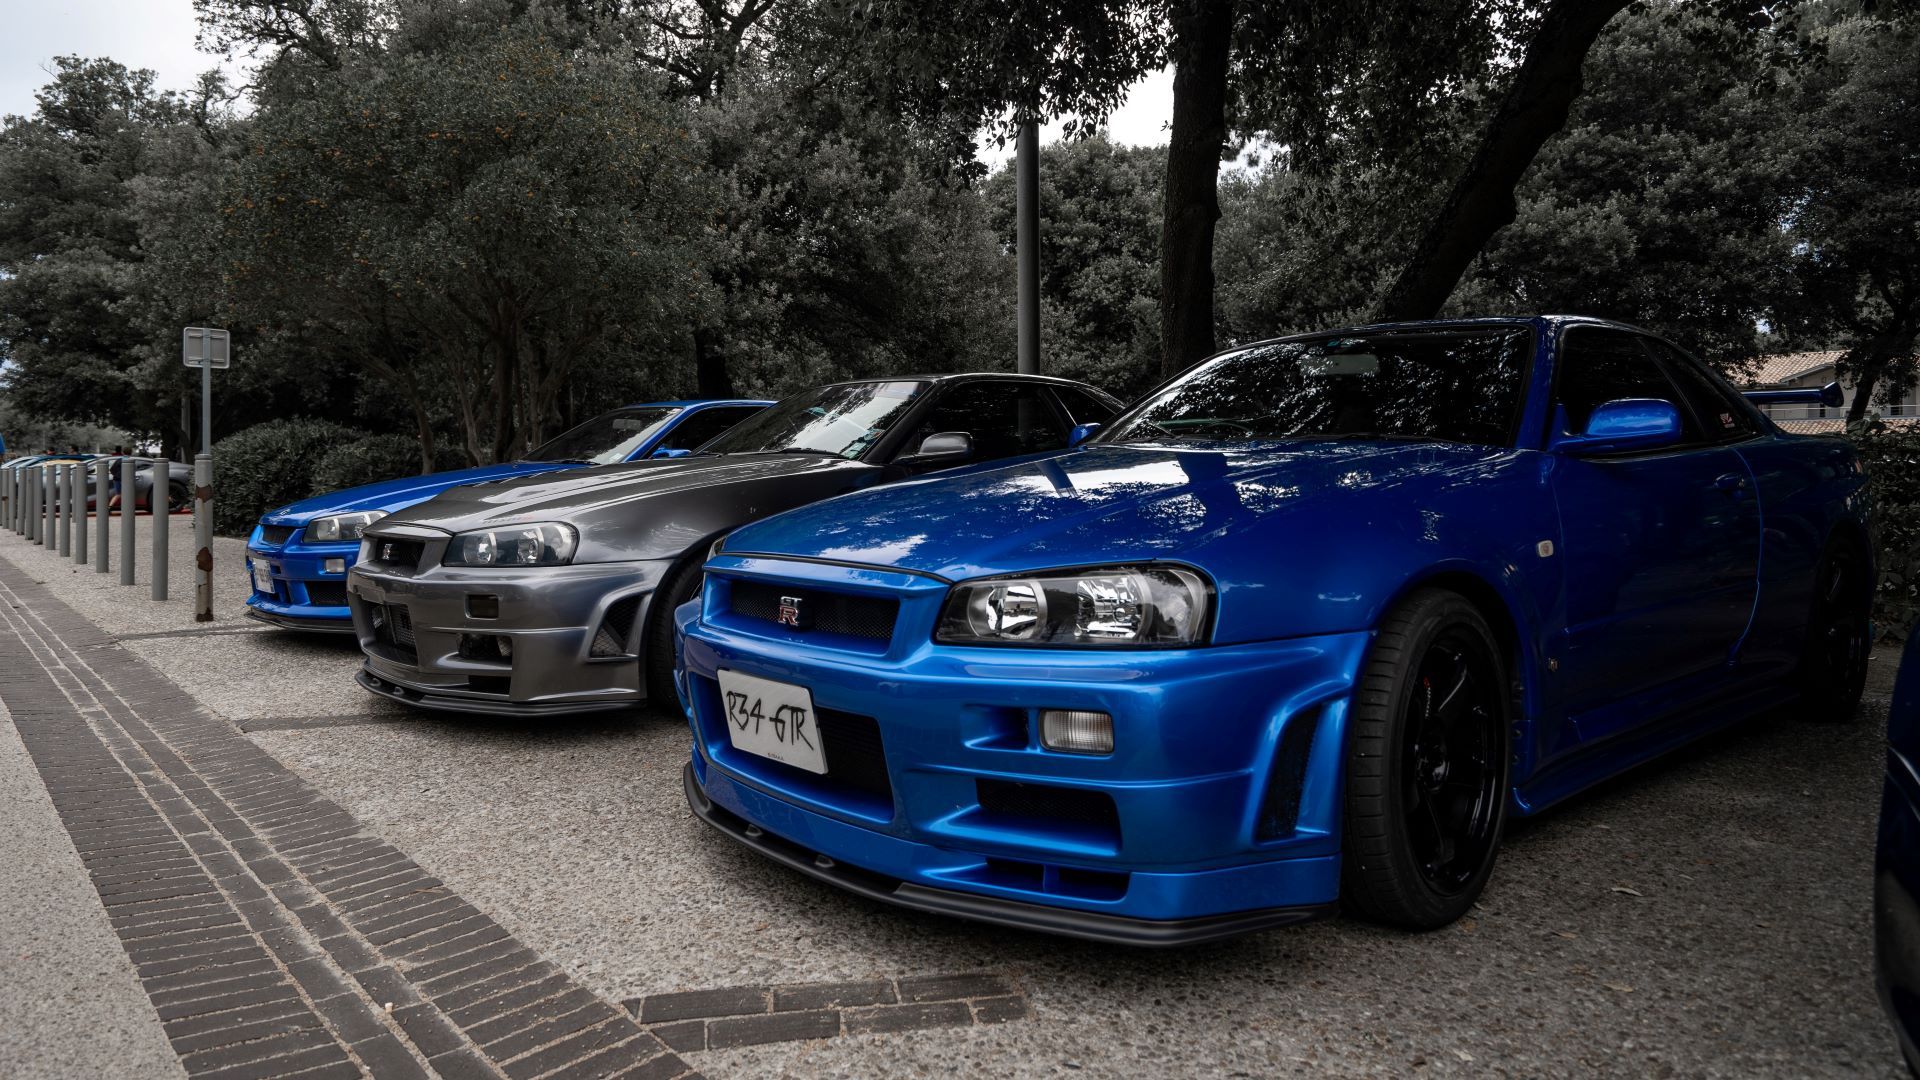 Front 3/4 shot of three Nissan Skyline GT-R R34s parked